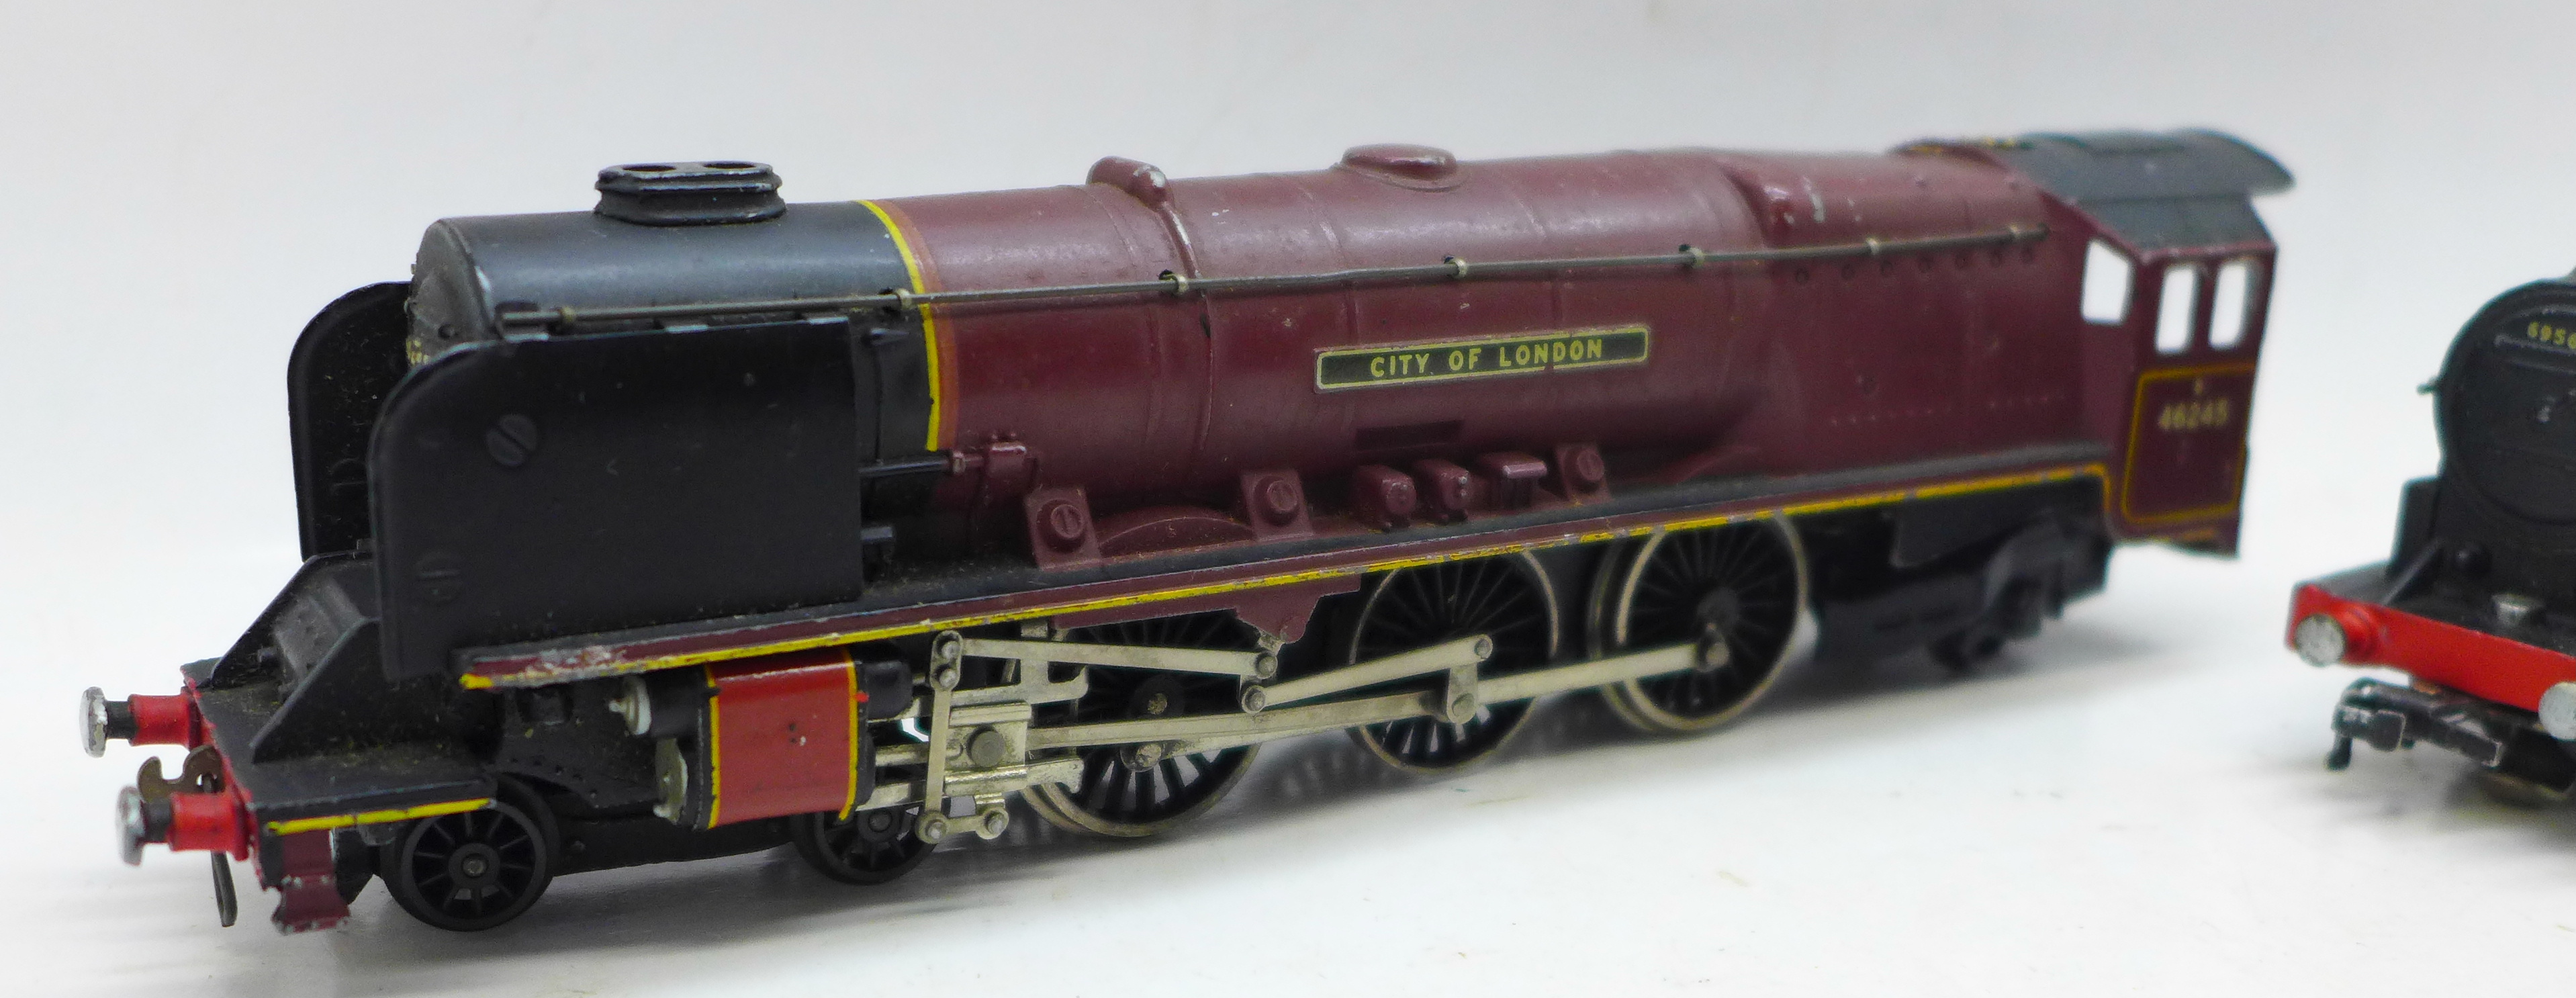 A Hornby OO gauge City of London locomotive and one other - Image 2 of 4